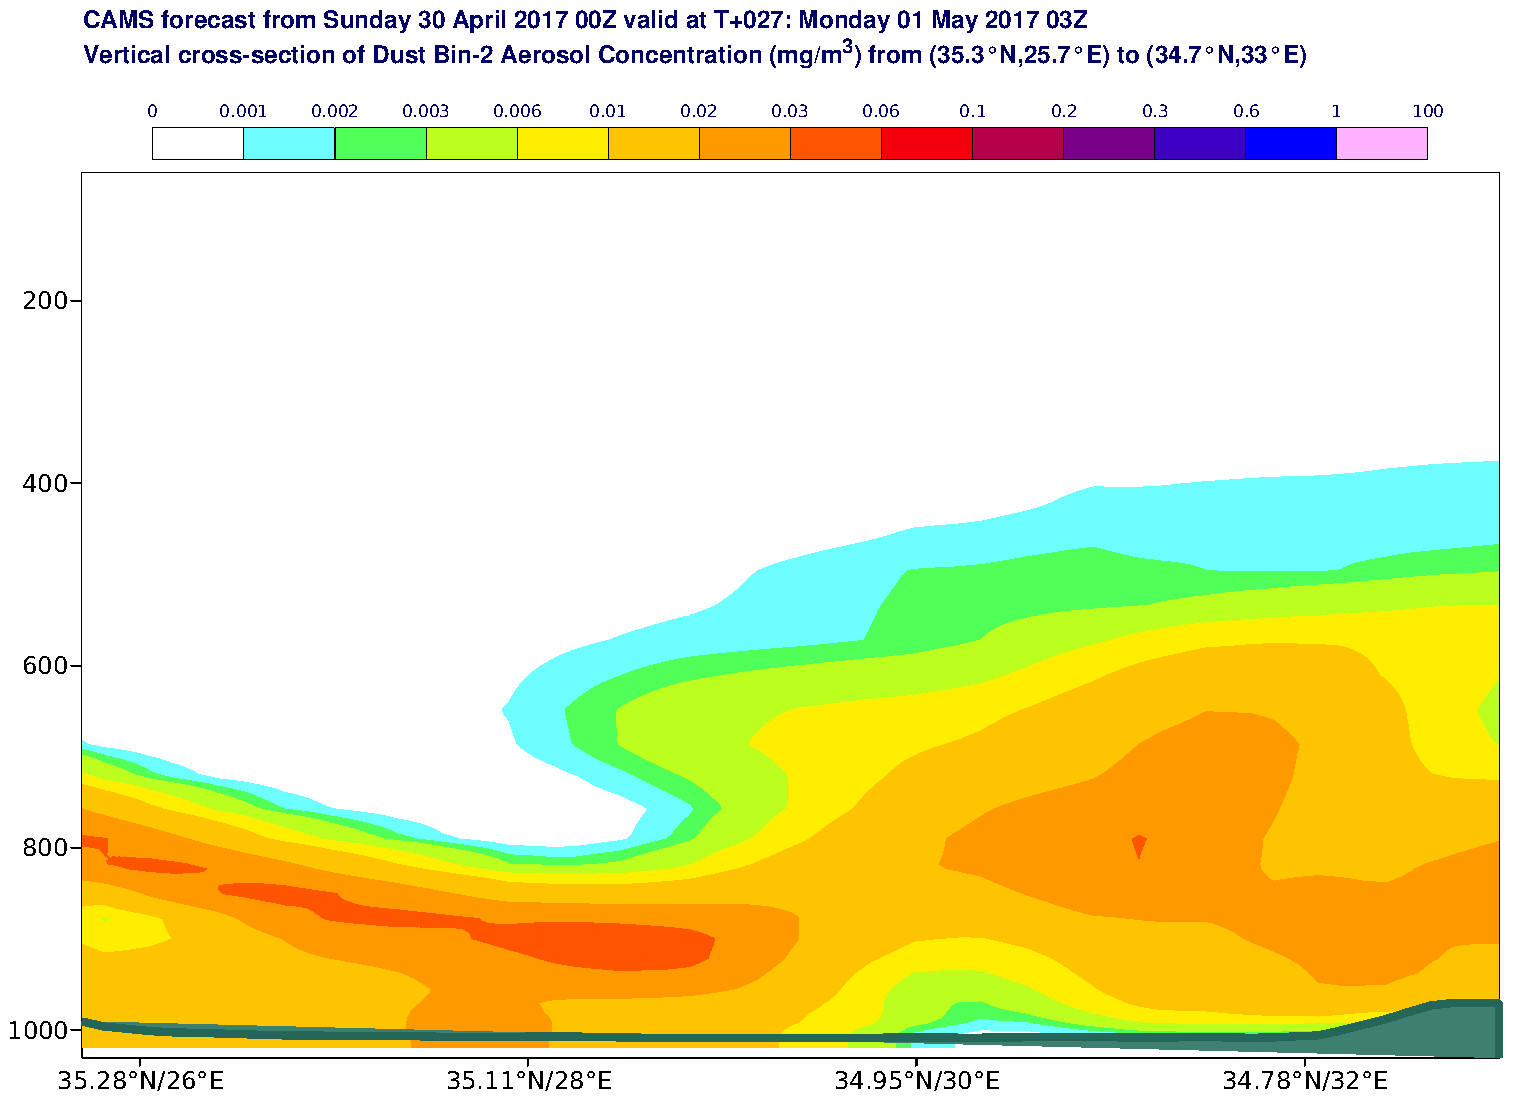 Vertical cross-section of Dust Bin-2 Aerosol Concentration (mg/m3) valid at T27 - 2017-05-01 03:00